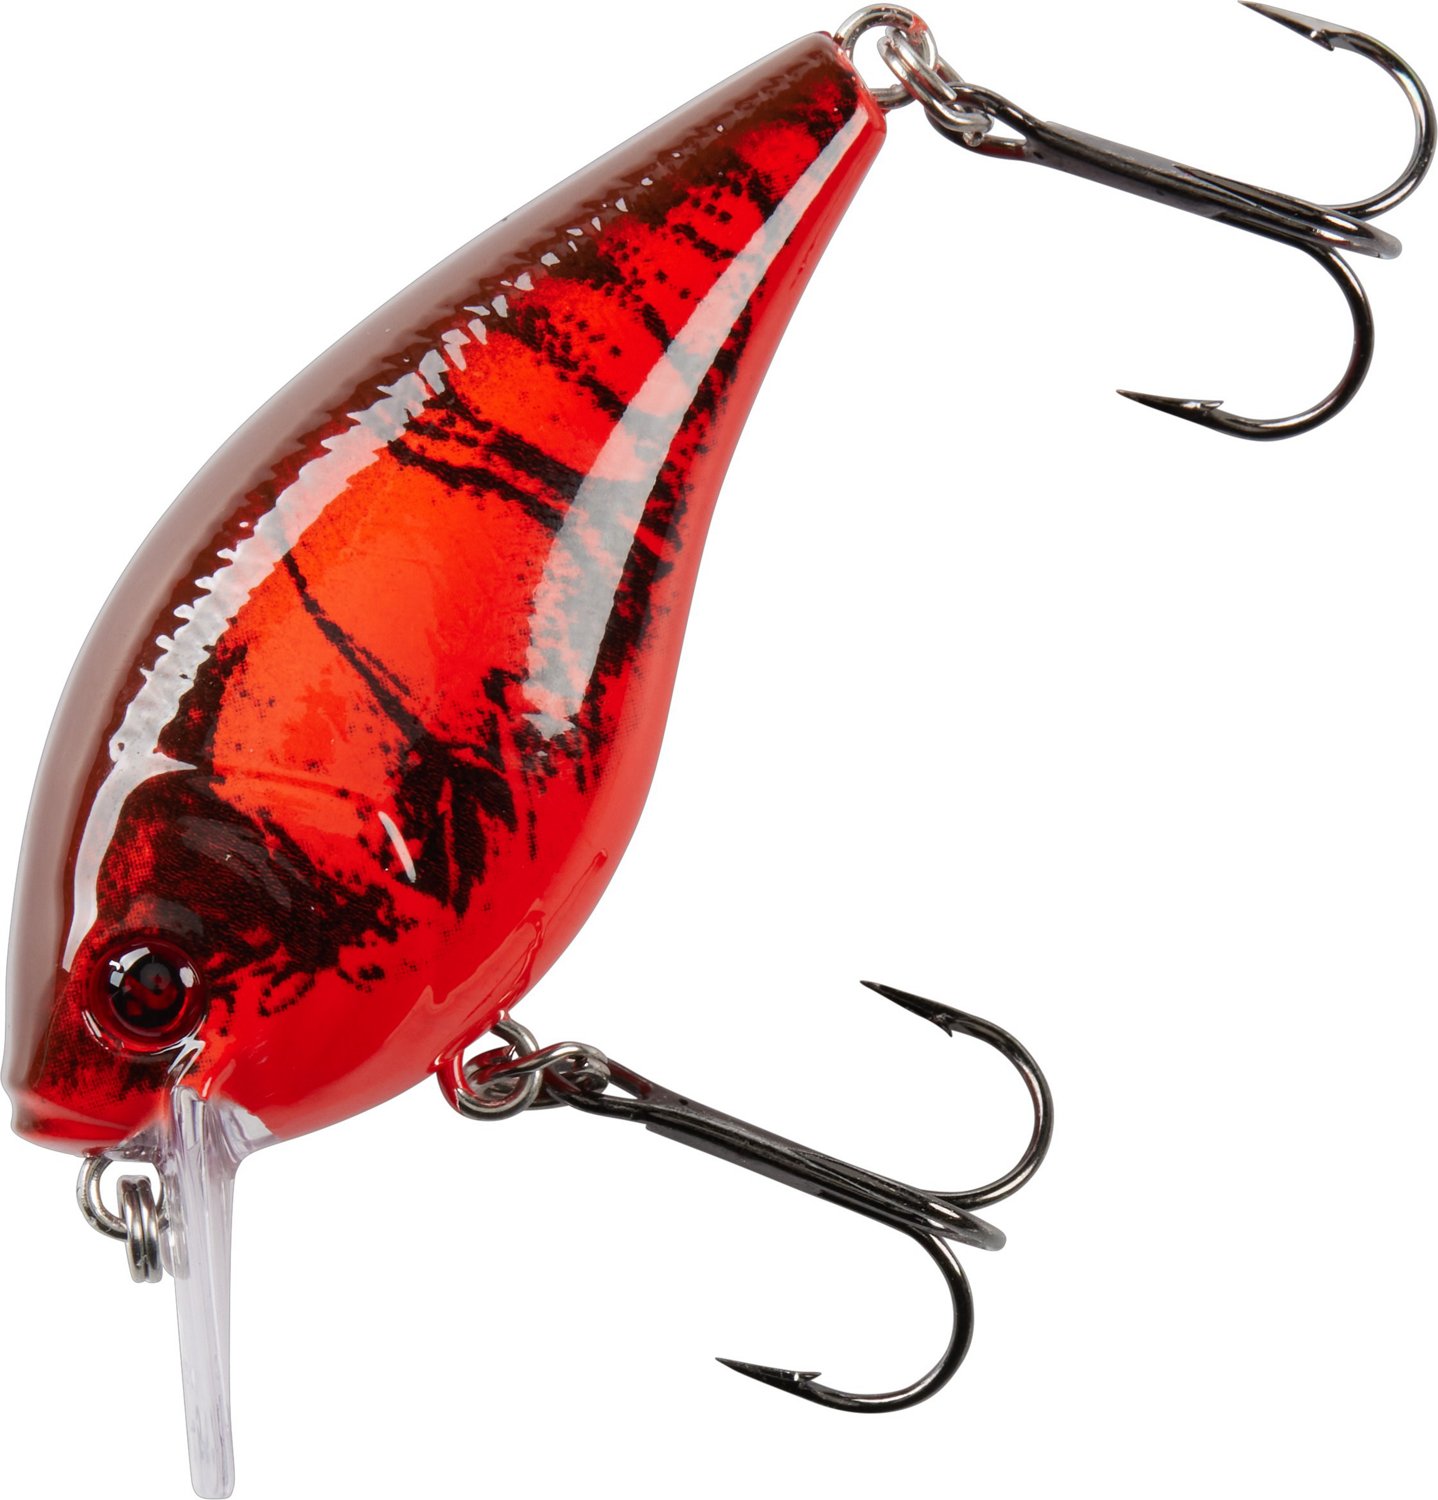 BassLegend Fishing Trout Lures Square Bill Crankbaits Shallow